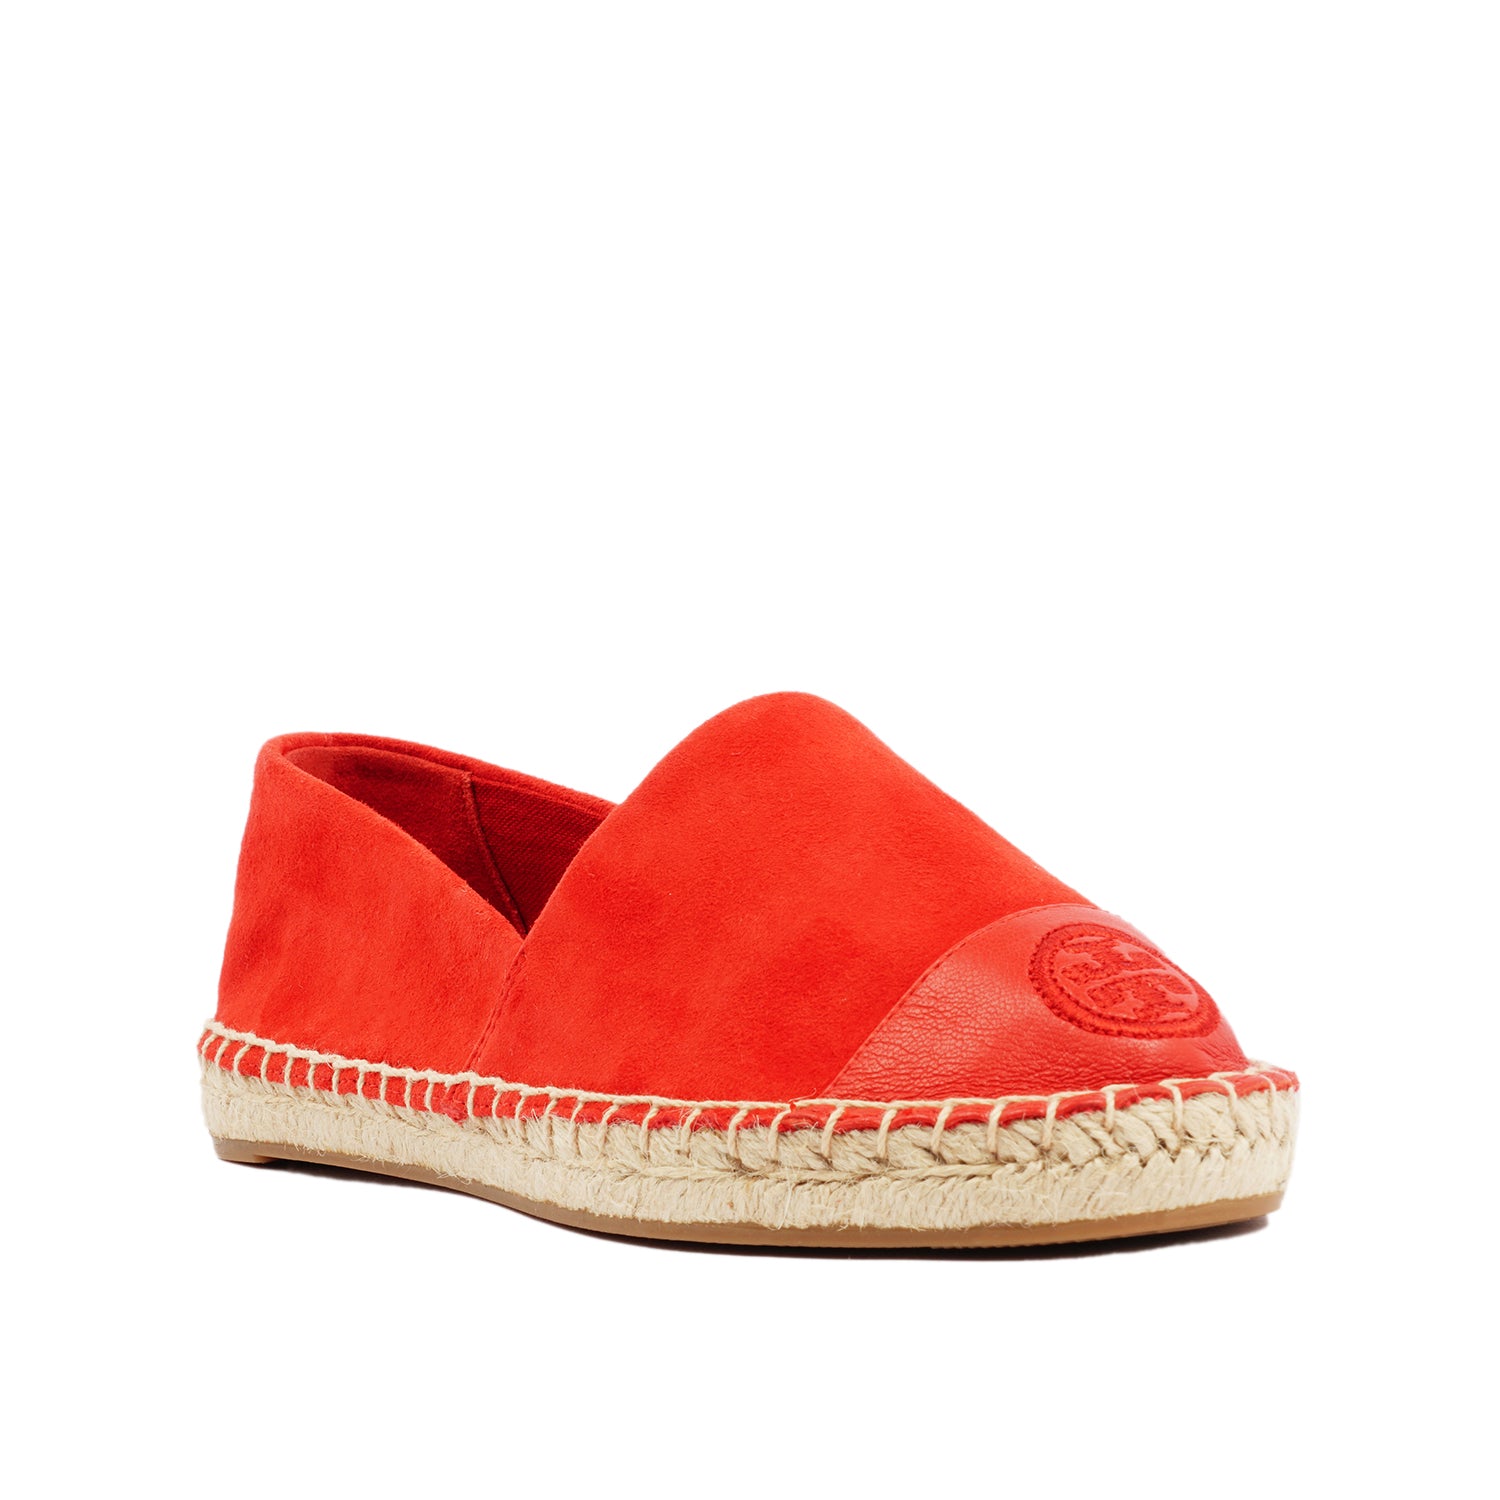 TORY BURCH COLOR BLOCK FLAT ESPADRILLE IN RED